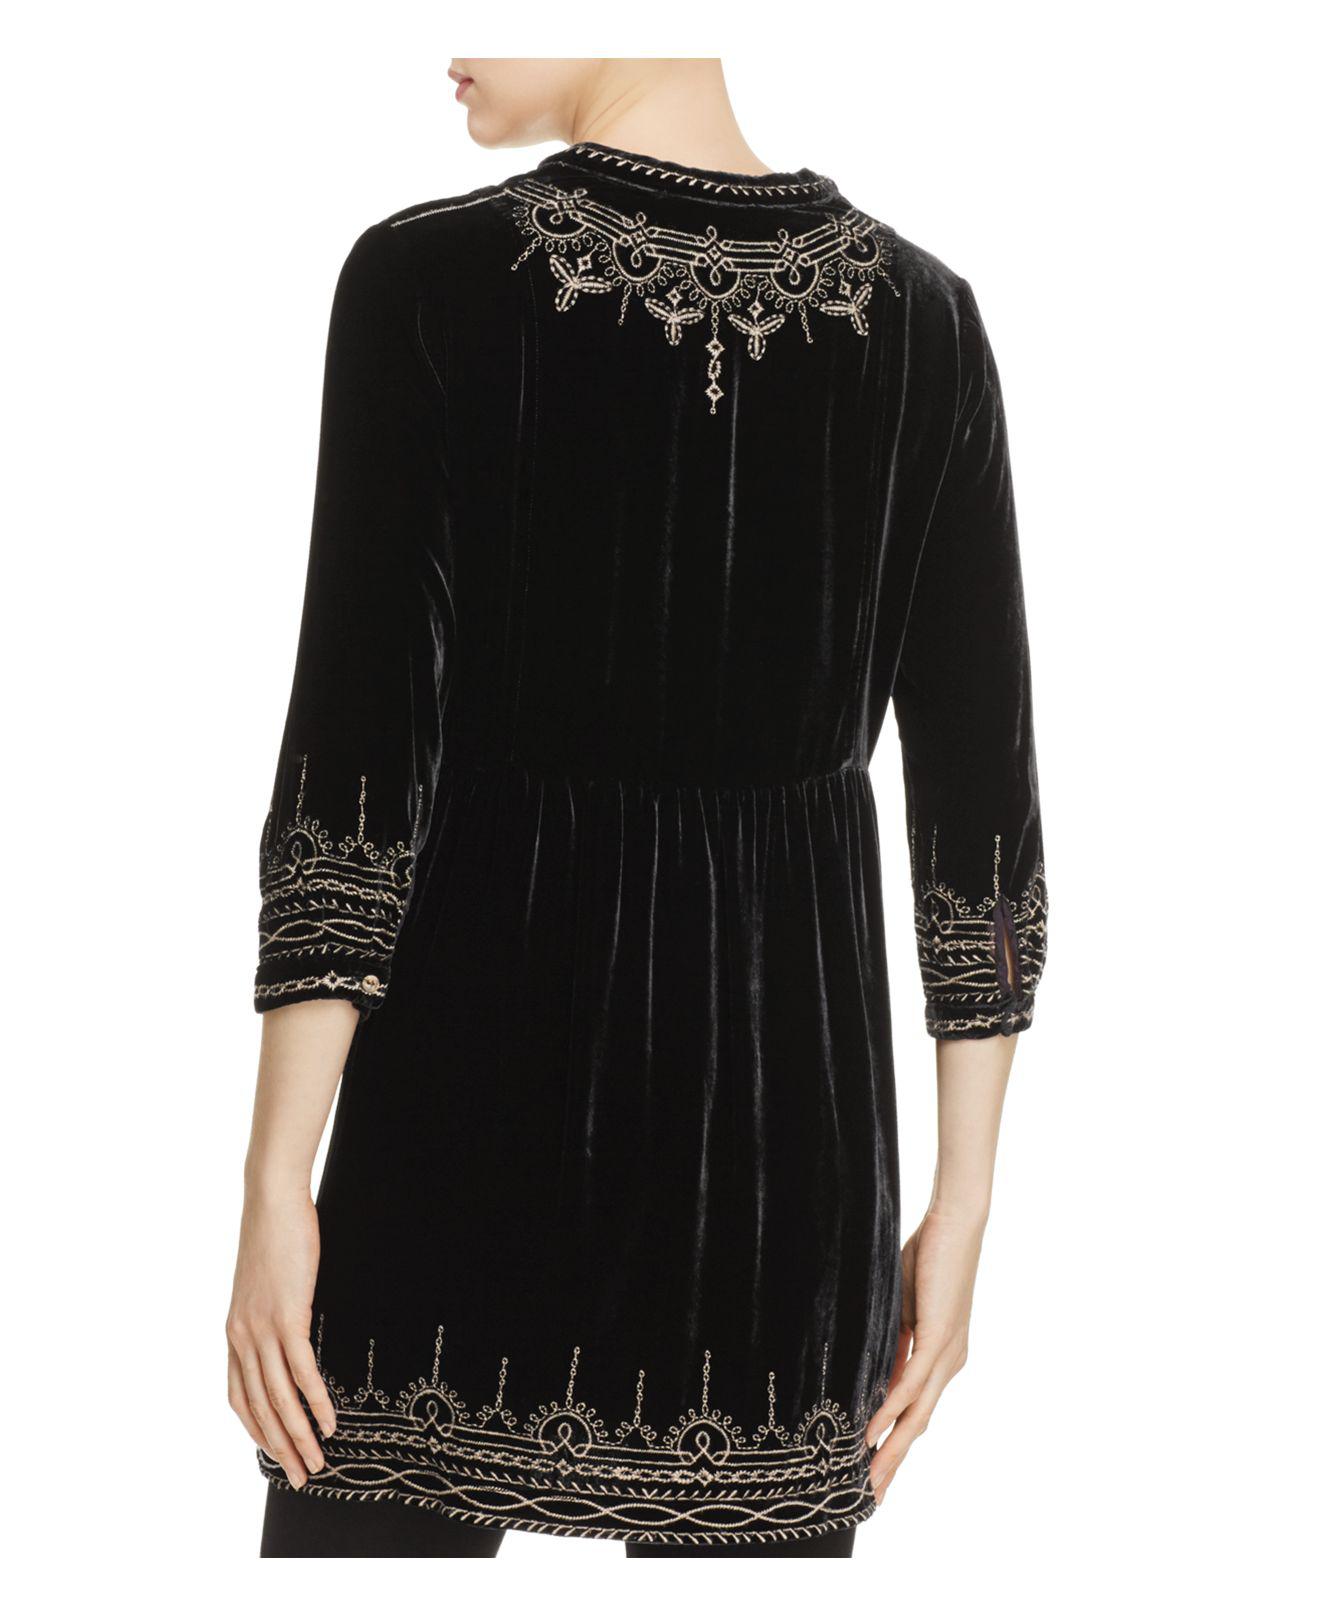 Johnny Was Embroidered Floral Velvet Tunic Top in Black - Lyst